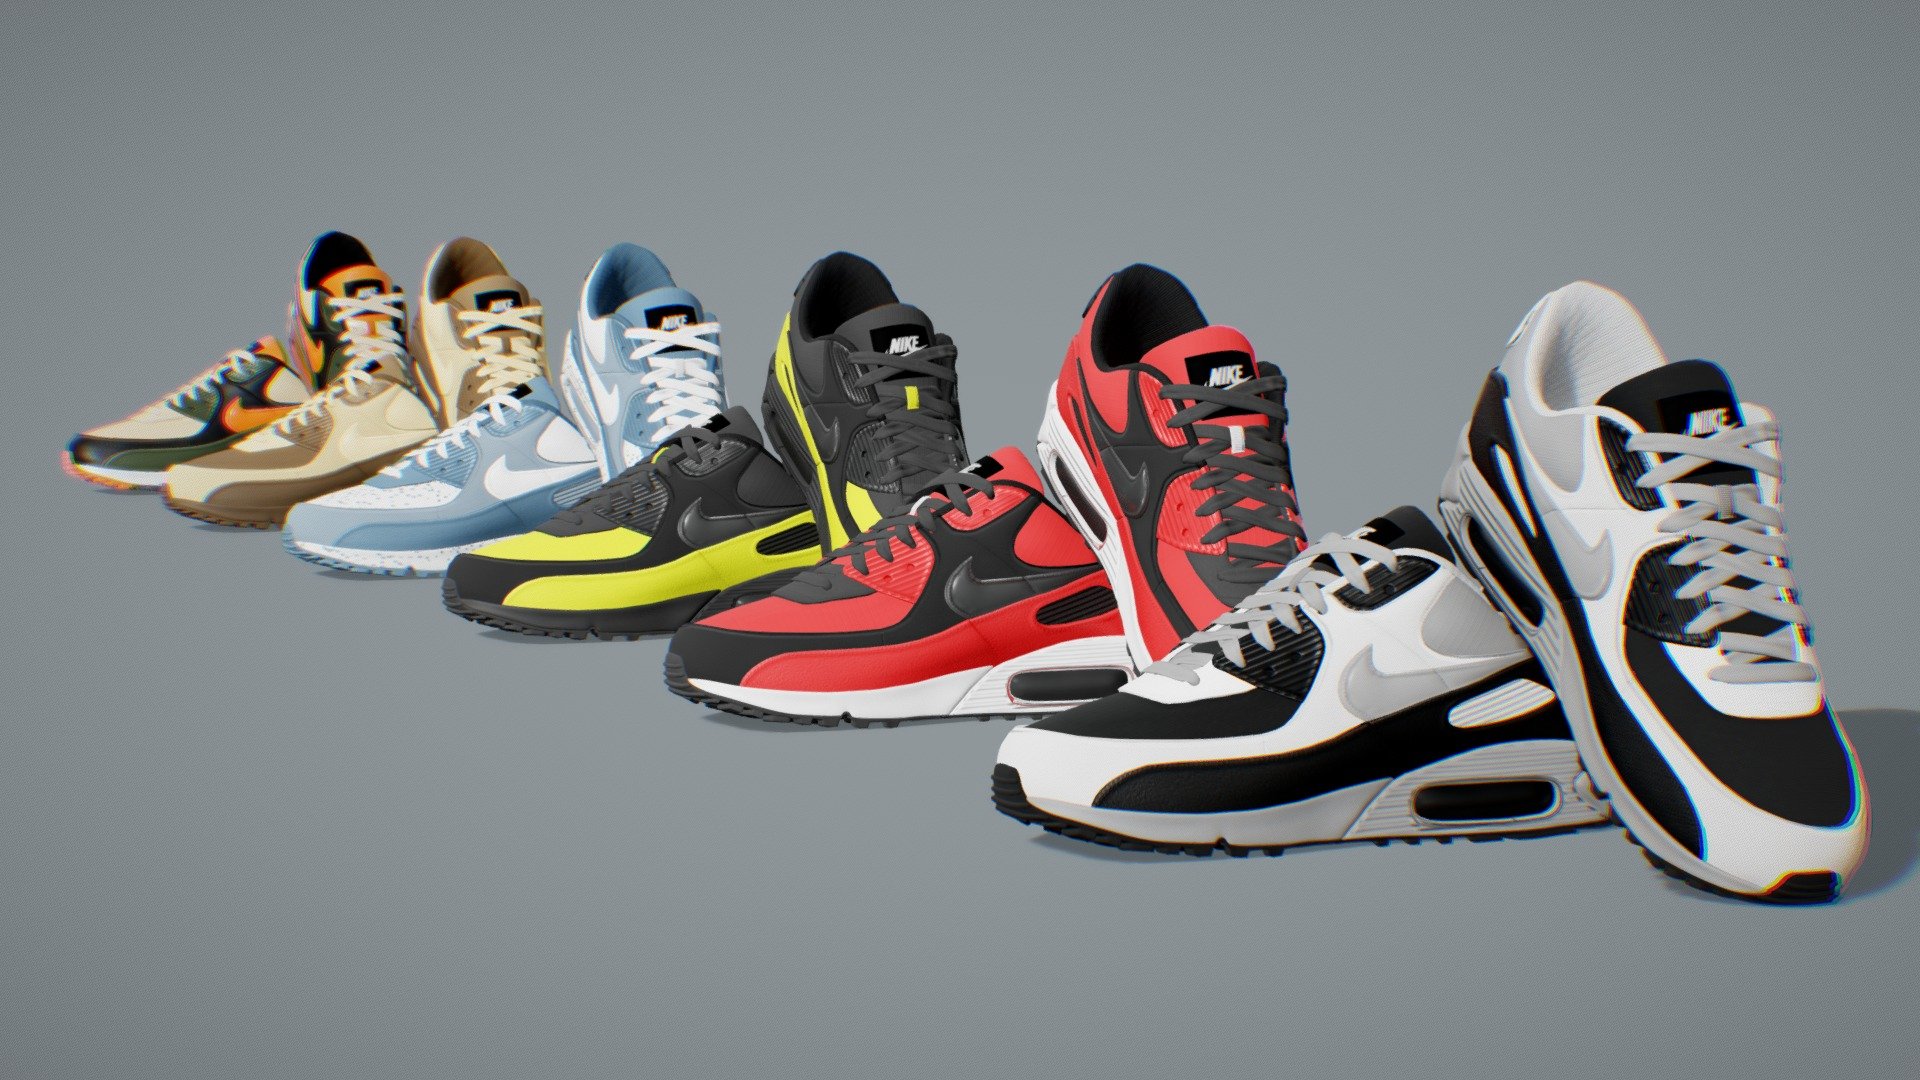 This are Airmax NIKE Shoes.
Textured differently,
There are 6 different textures Version.
Textures in 4k resolution.

Buy individually Here:
1) https://skfb.ly/oxPyV
2) https://skfb.ly/oxPBZ
3) https://skfb.ly/oxPCv
4) https://skfb.ly/oxPCG
5) https://skfb.ly/oxPCL
6) https://skfb.ly/oxPCR - Nike Shoe Airmax 01-06 - Buy Royalty Free 3D model by 5th Dimension (@5th-Dimension) 3d model